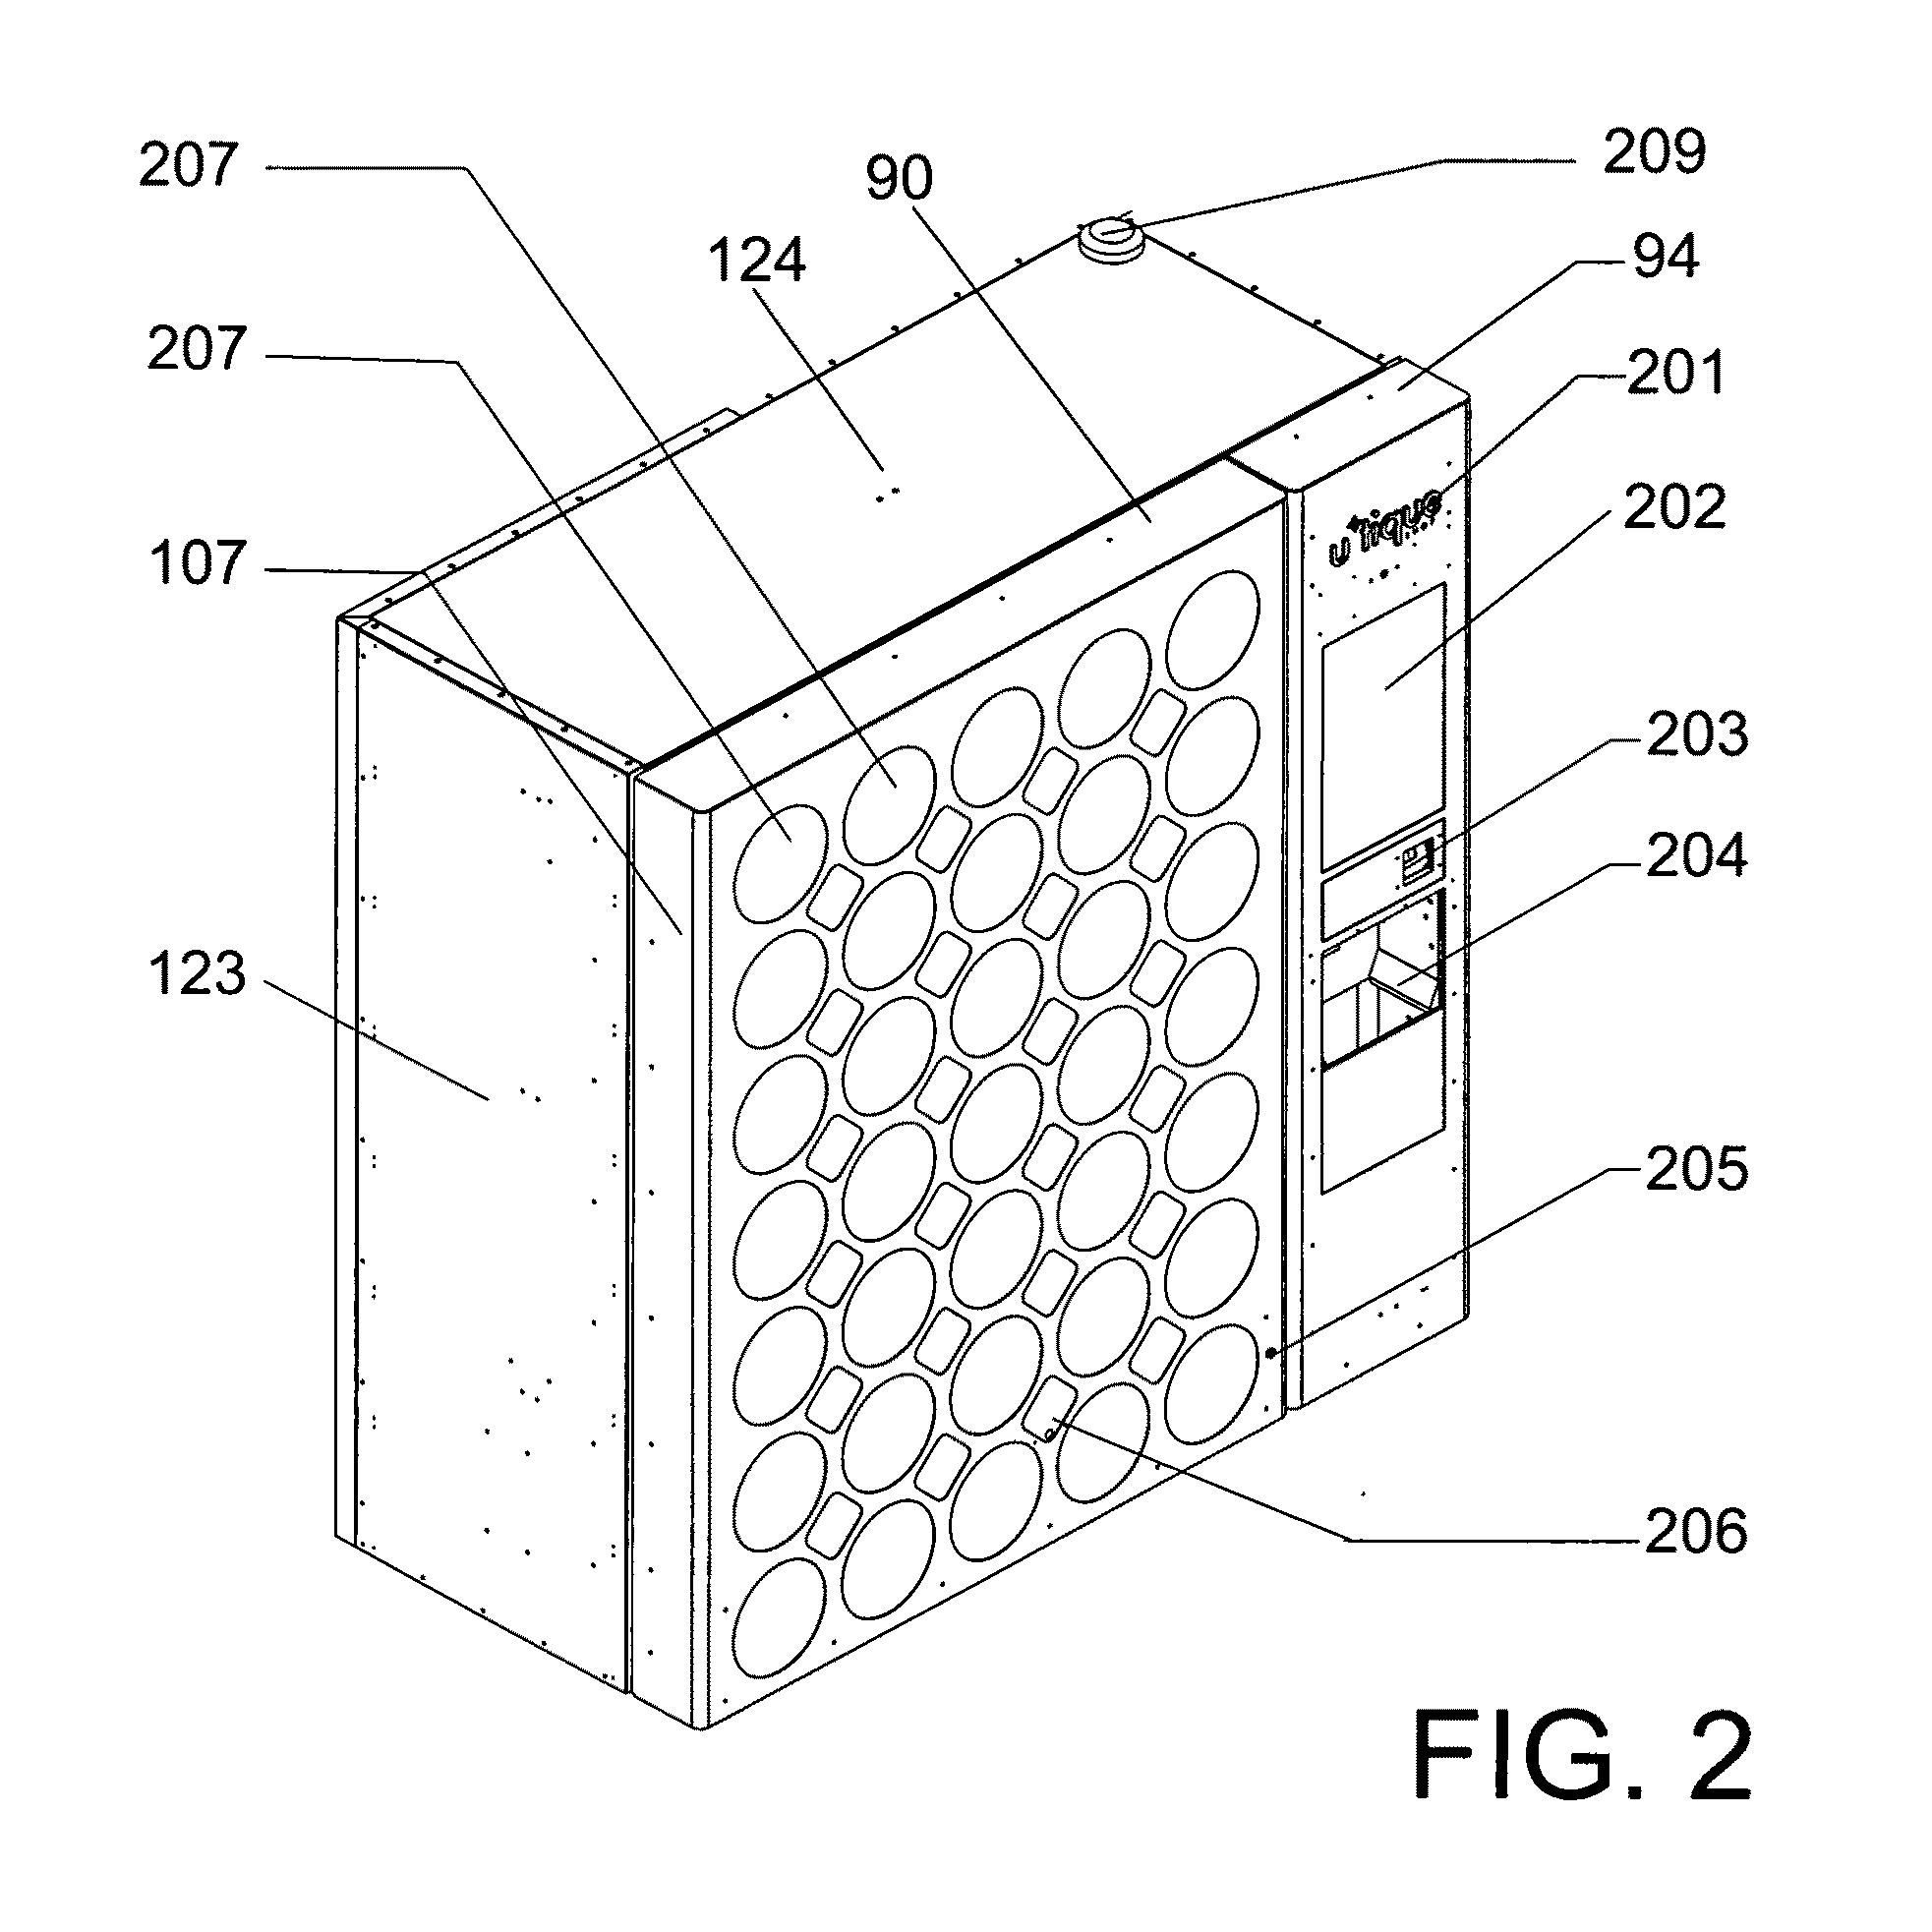 Vending machines with lighting interactivity and item-based lighting systems for retail display and automated retail stores